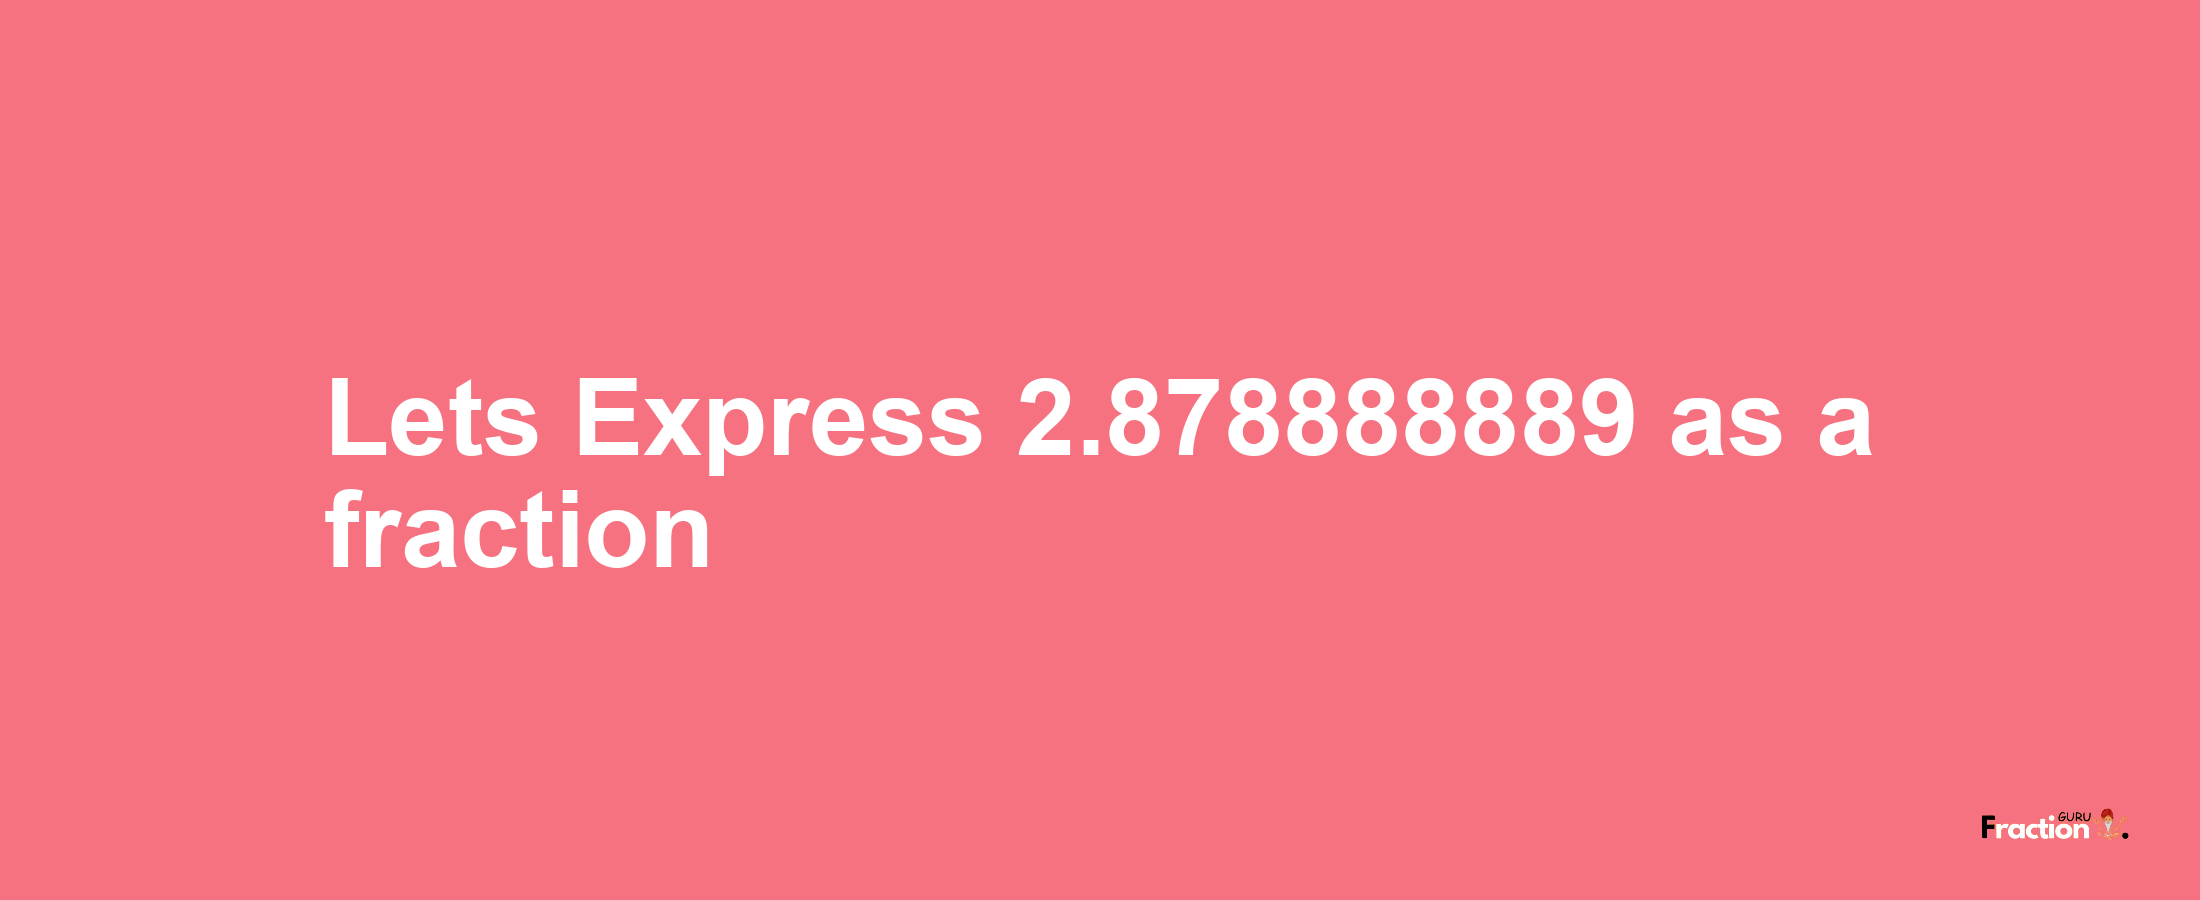 Lets Express 2.878888889 as afraction